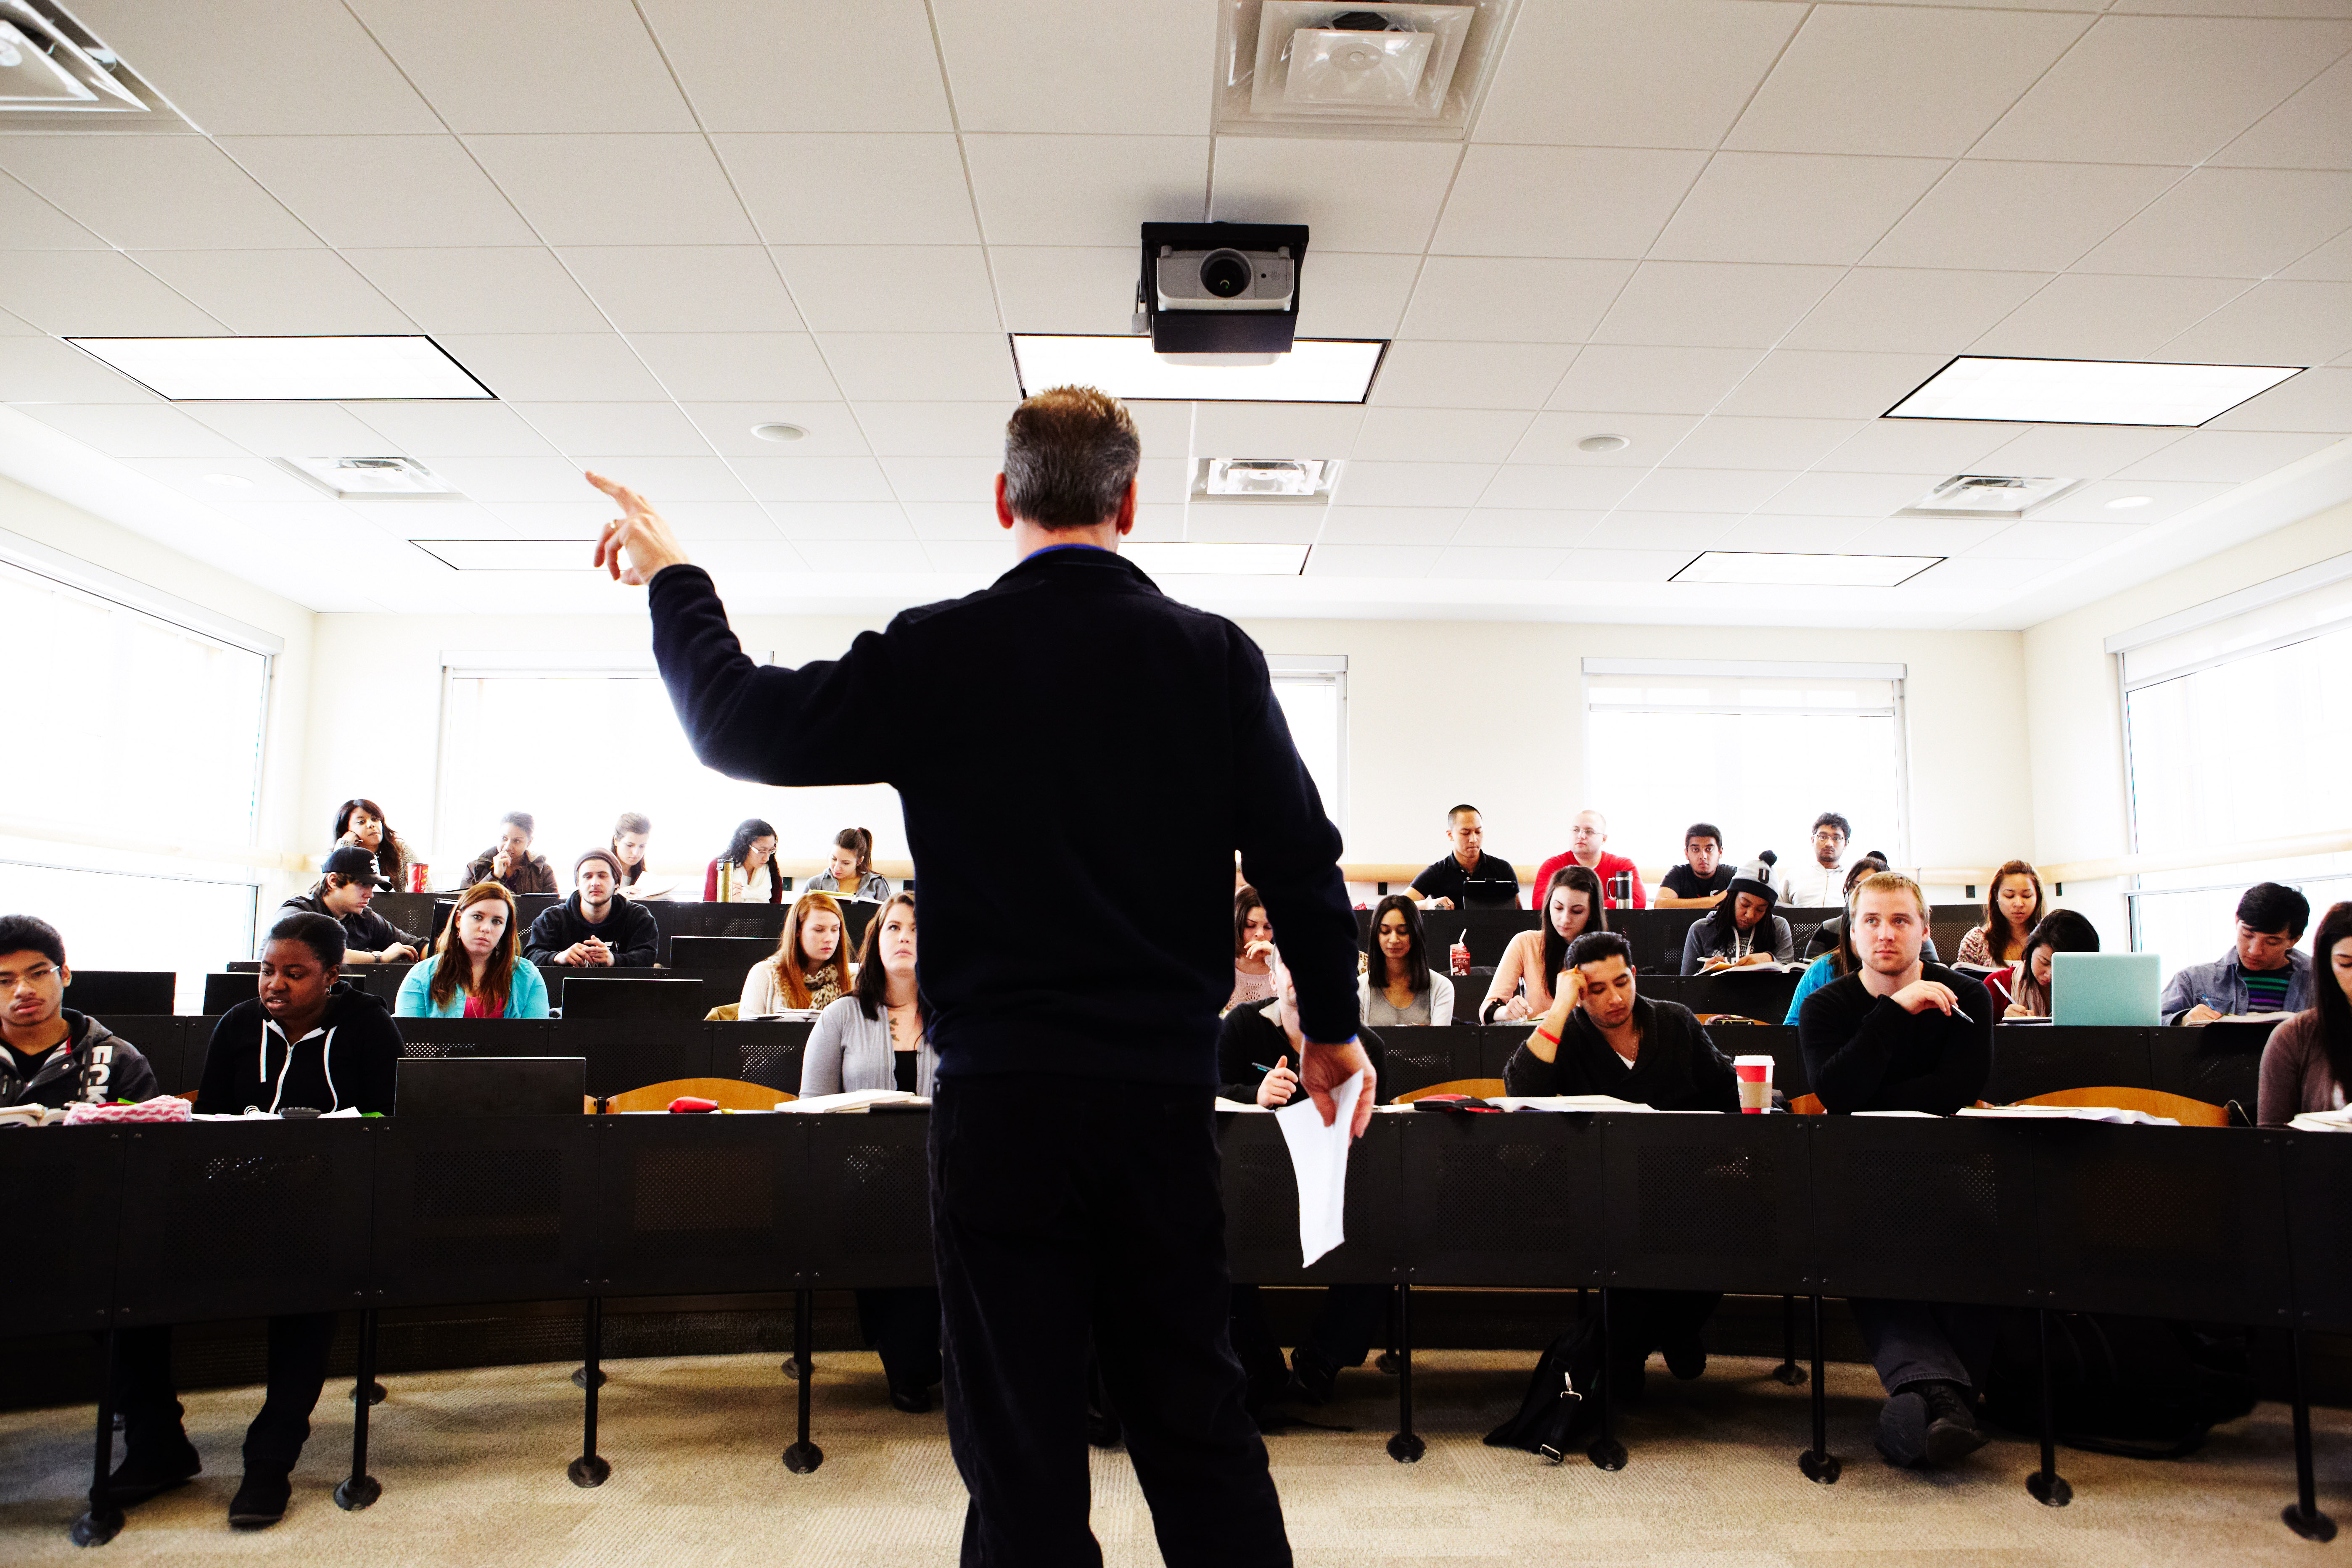 Instructor giving a lecture in a small lecture hall